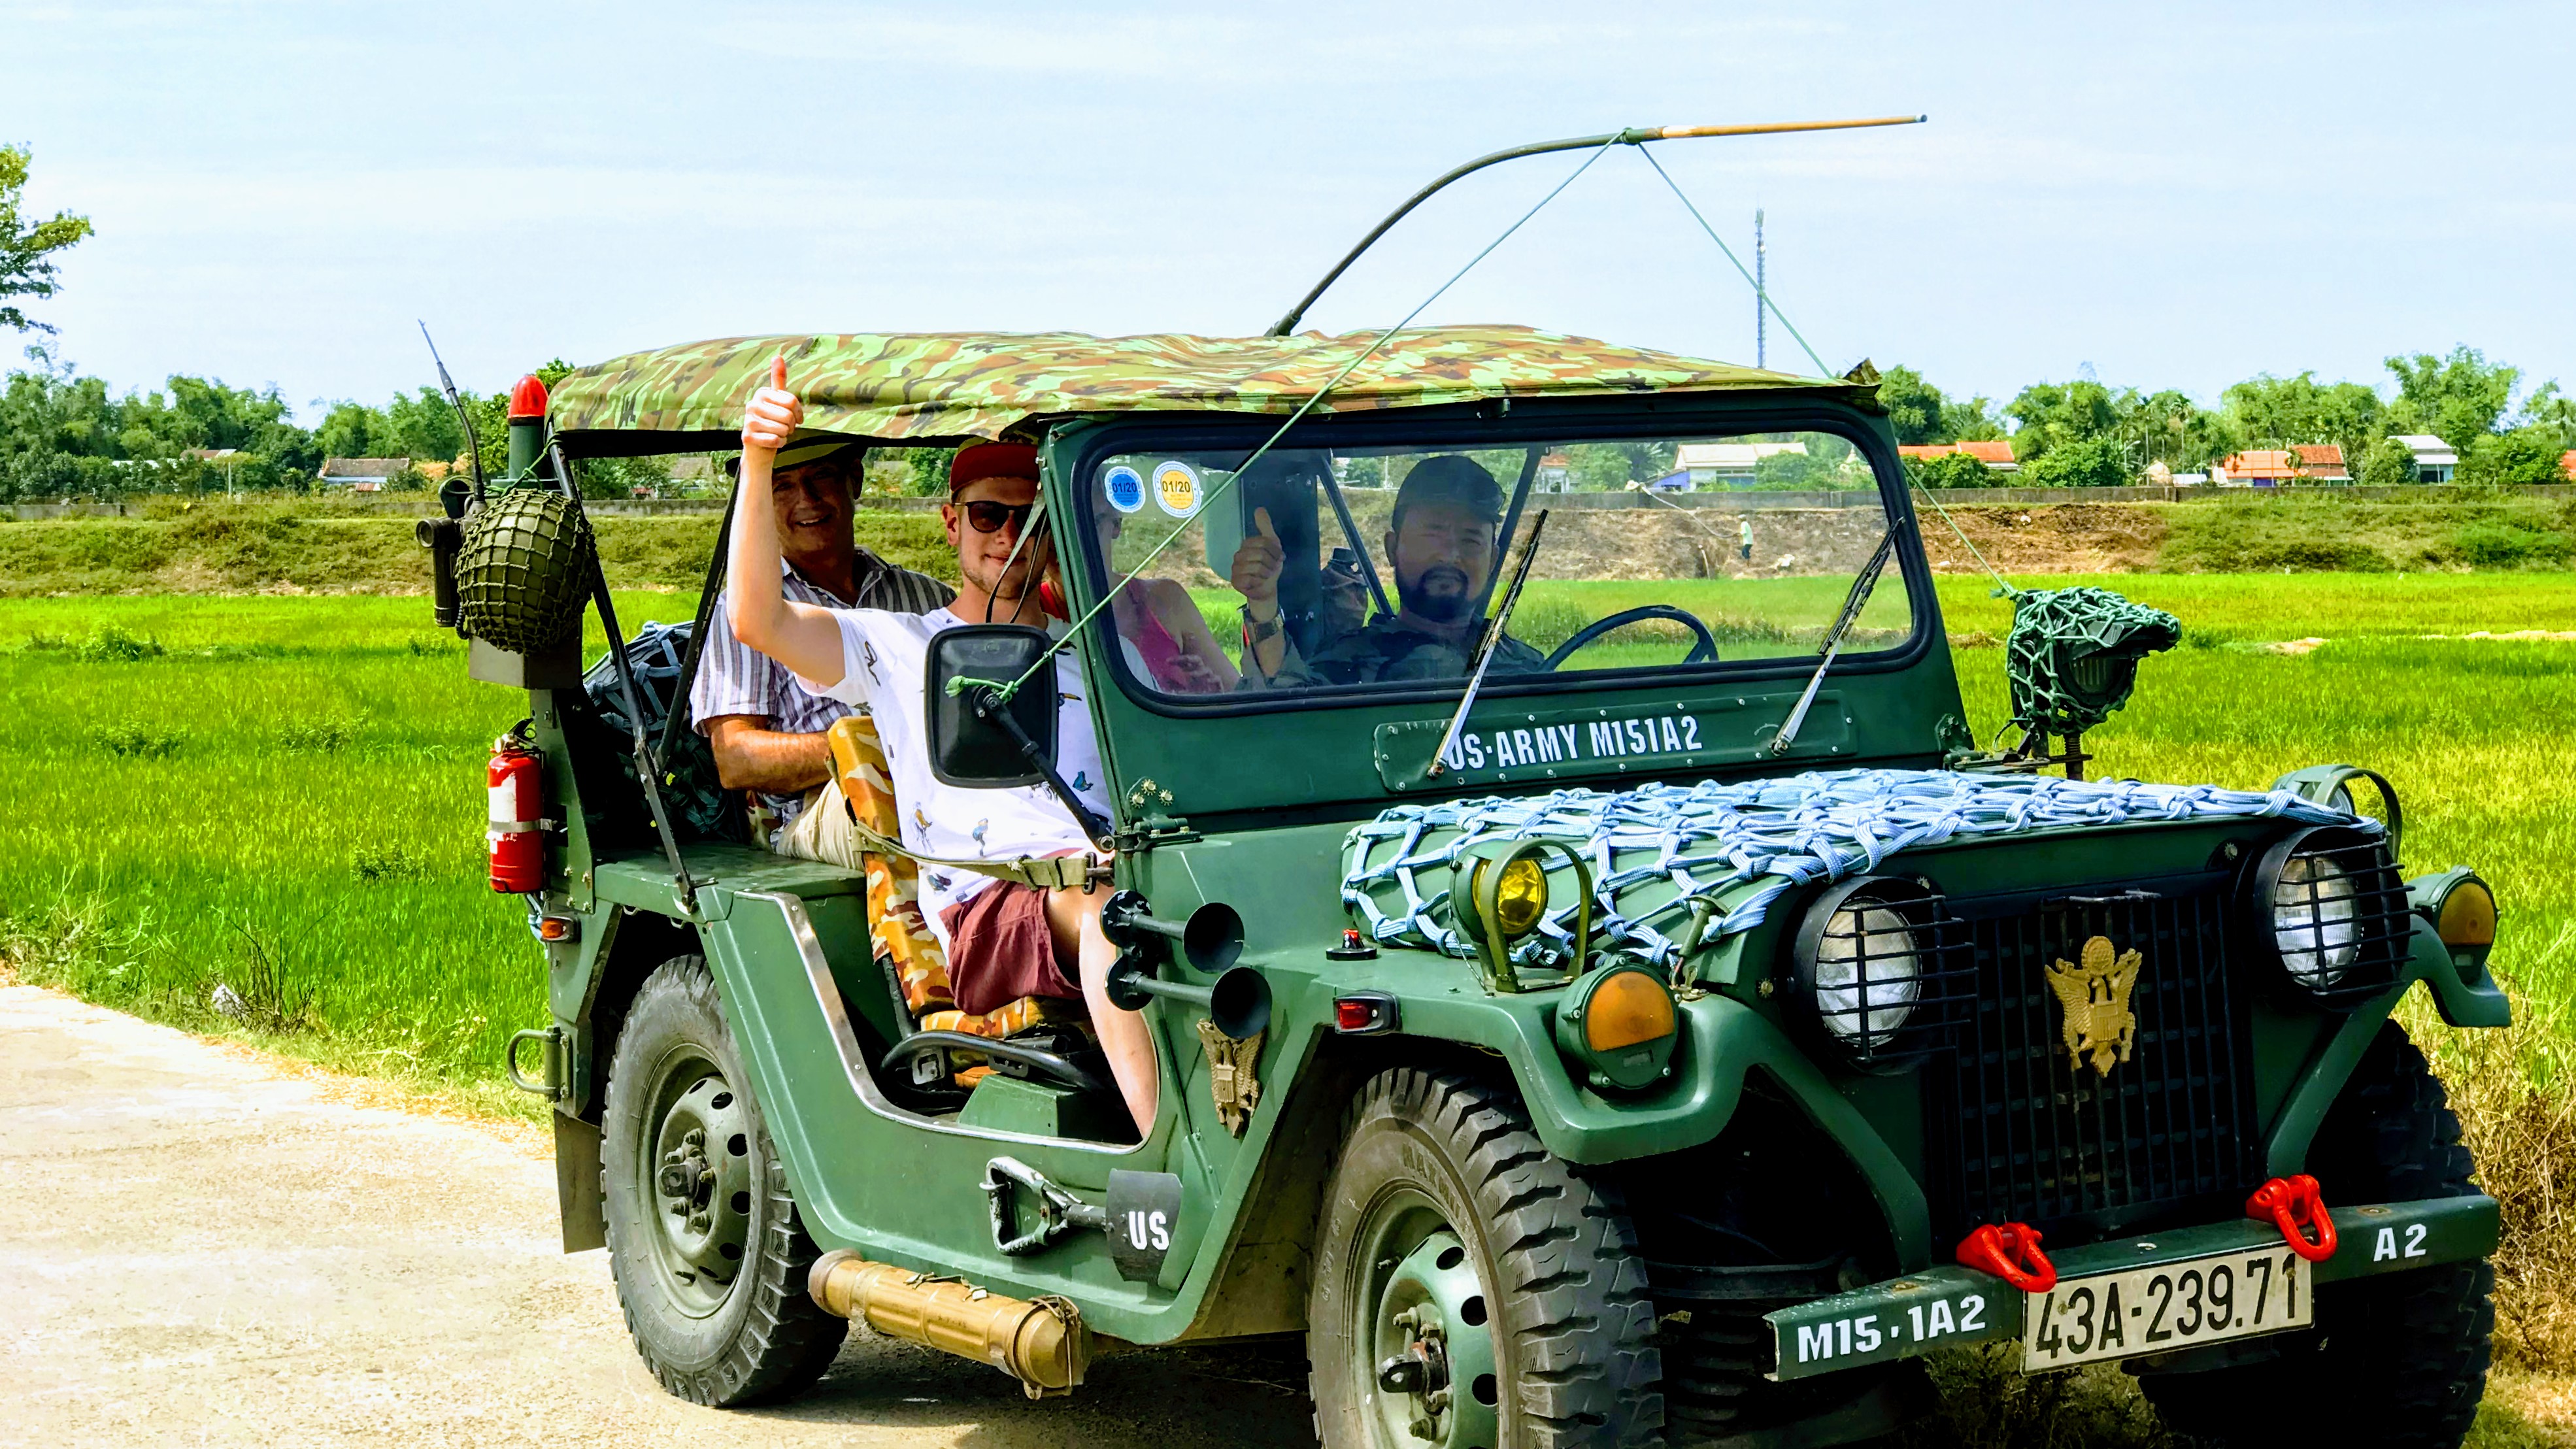 Hoi An Countryside Villages by Army Jeep or A/C car – Private Tour